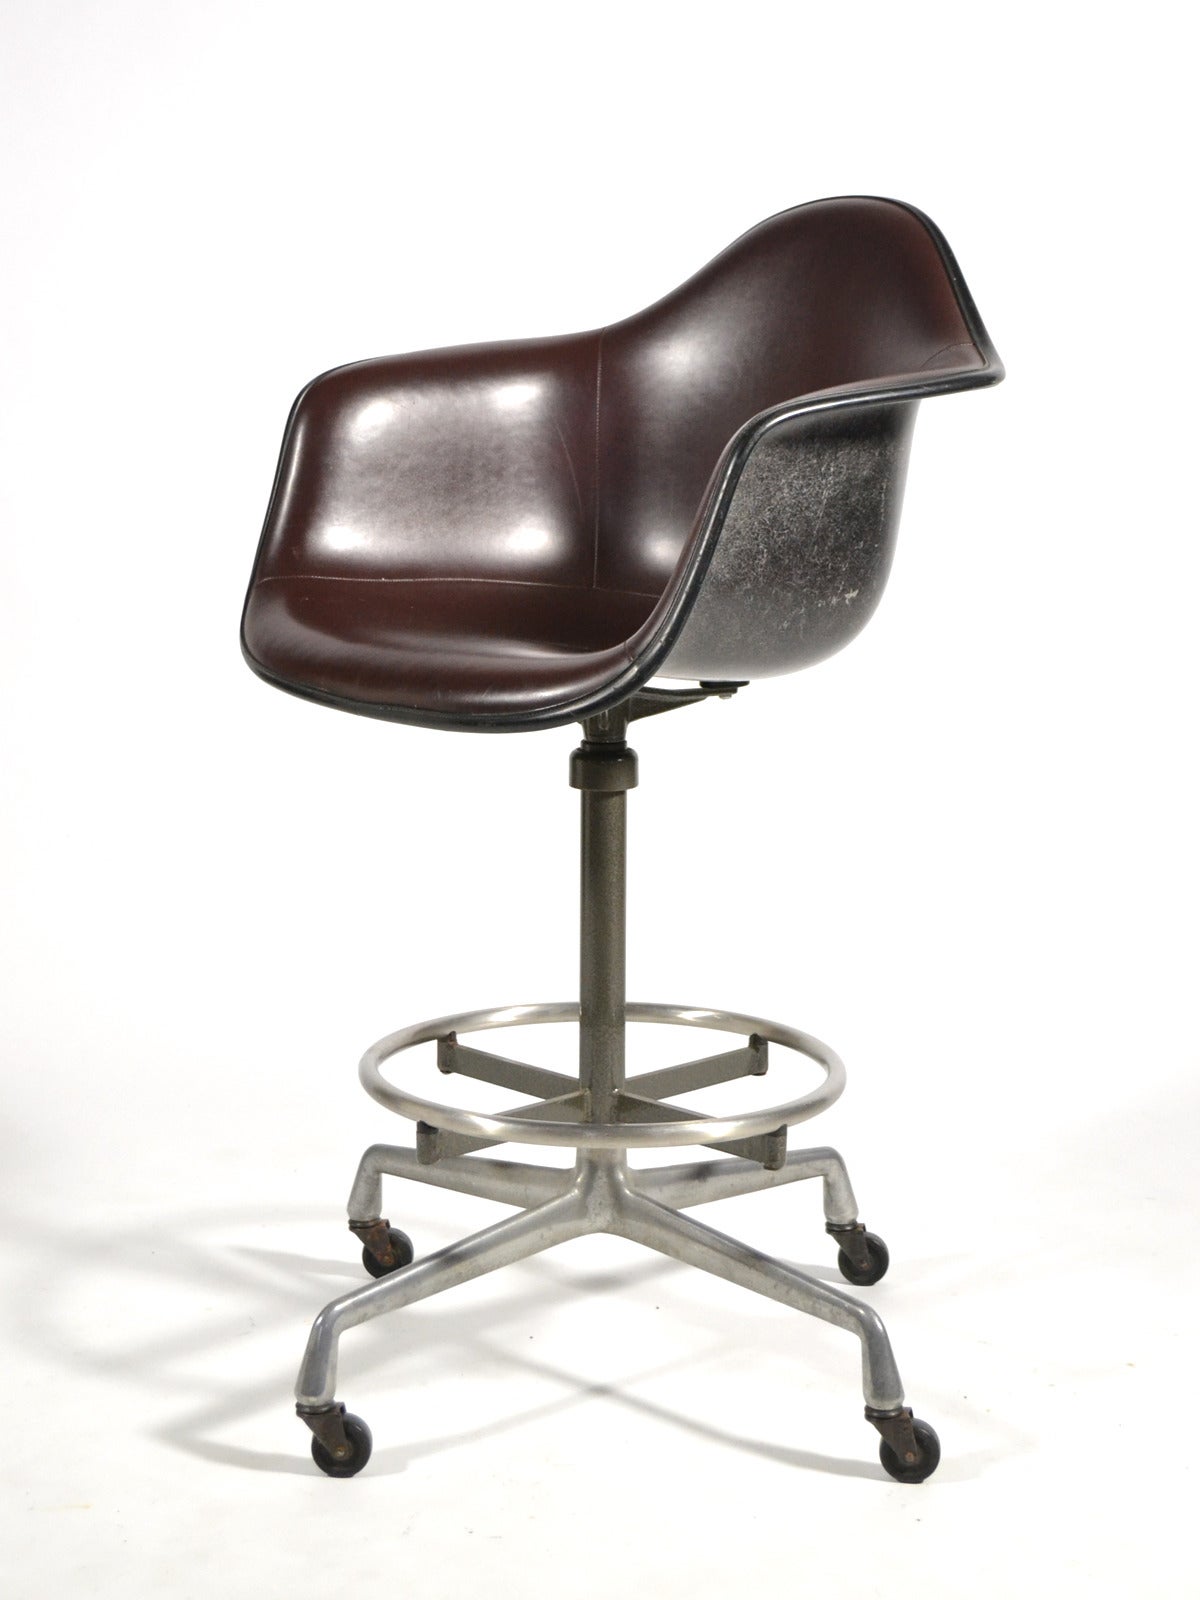 American Charles and Ray Eames Drafting Height Armchair by Herman Miller